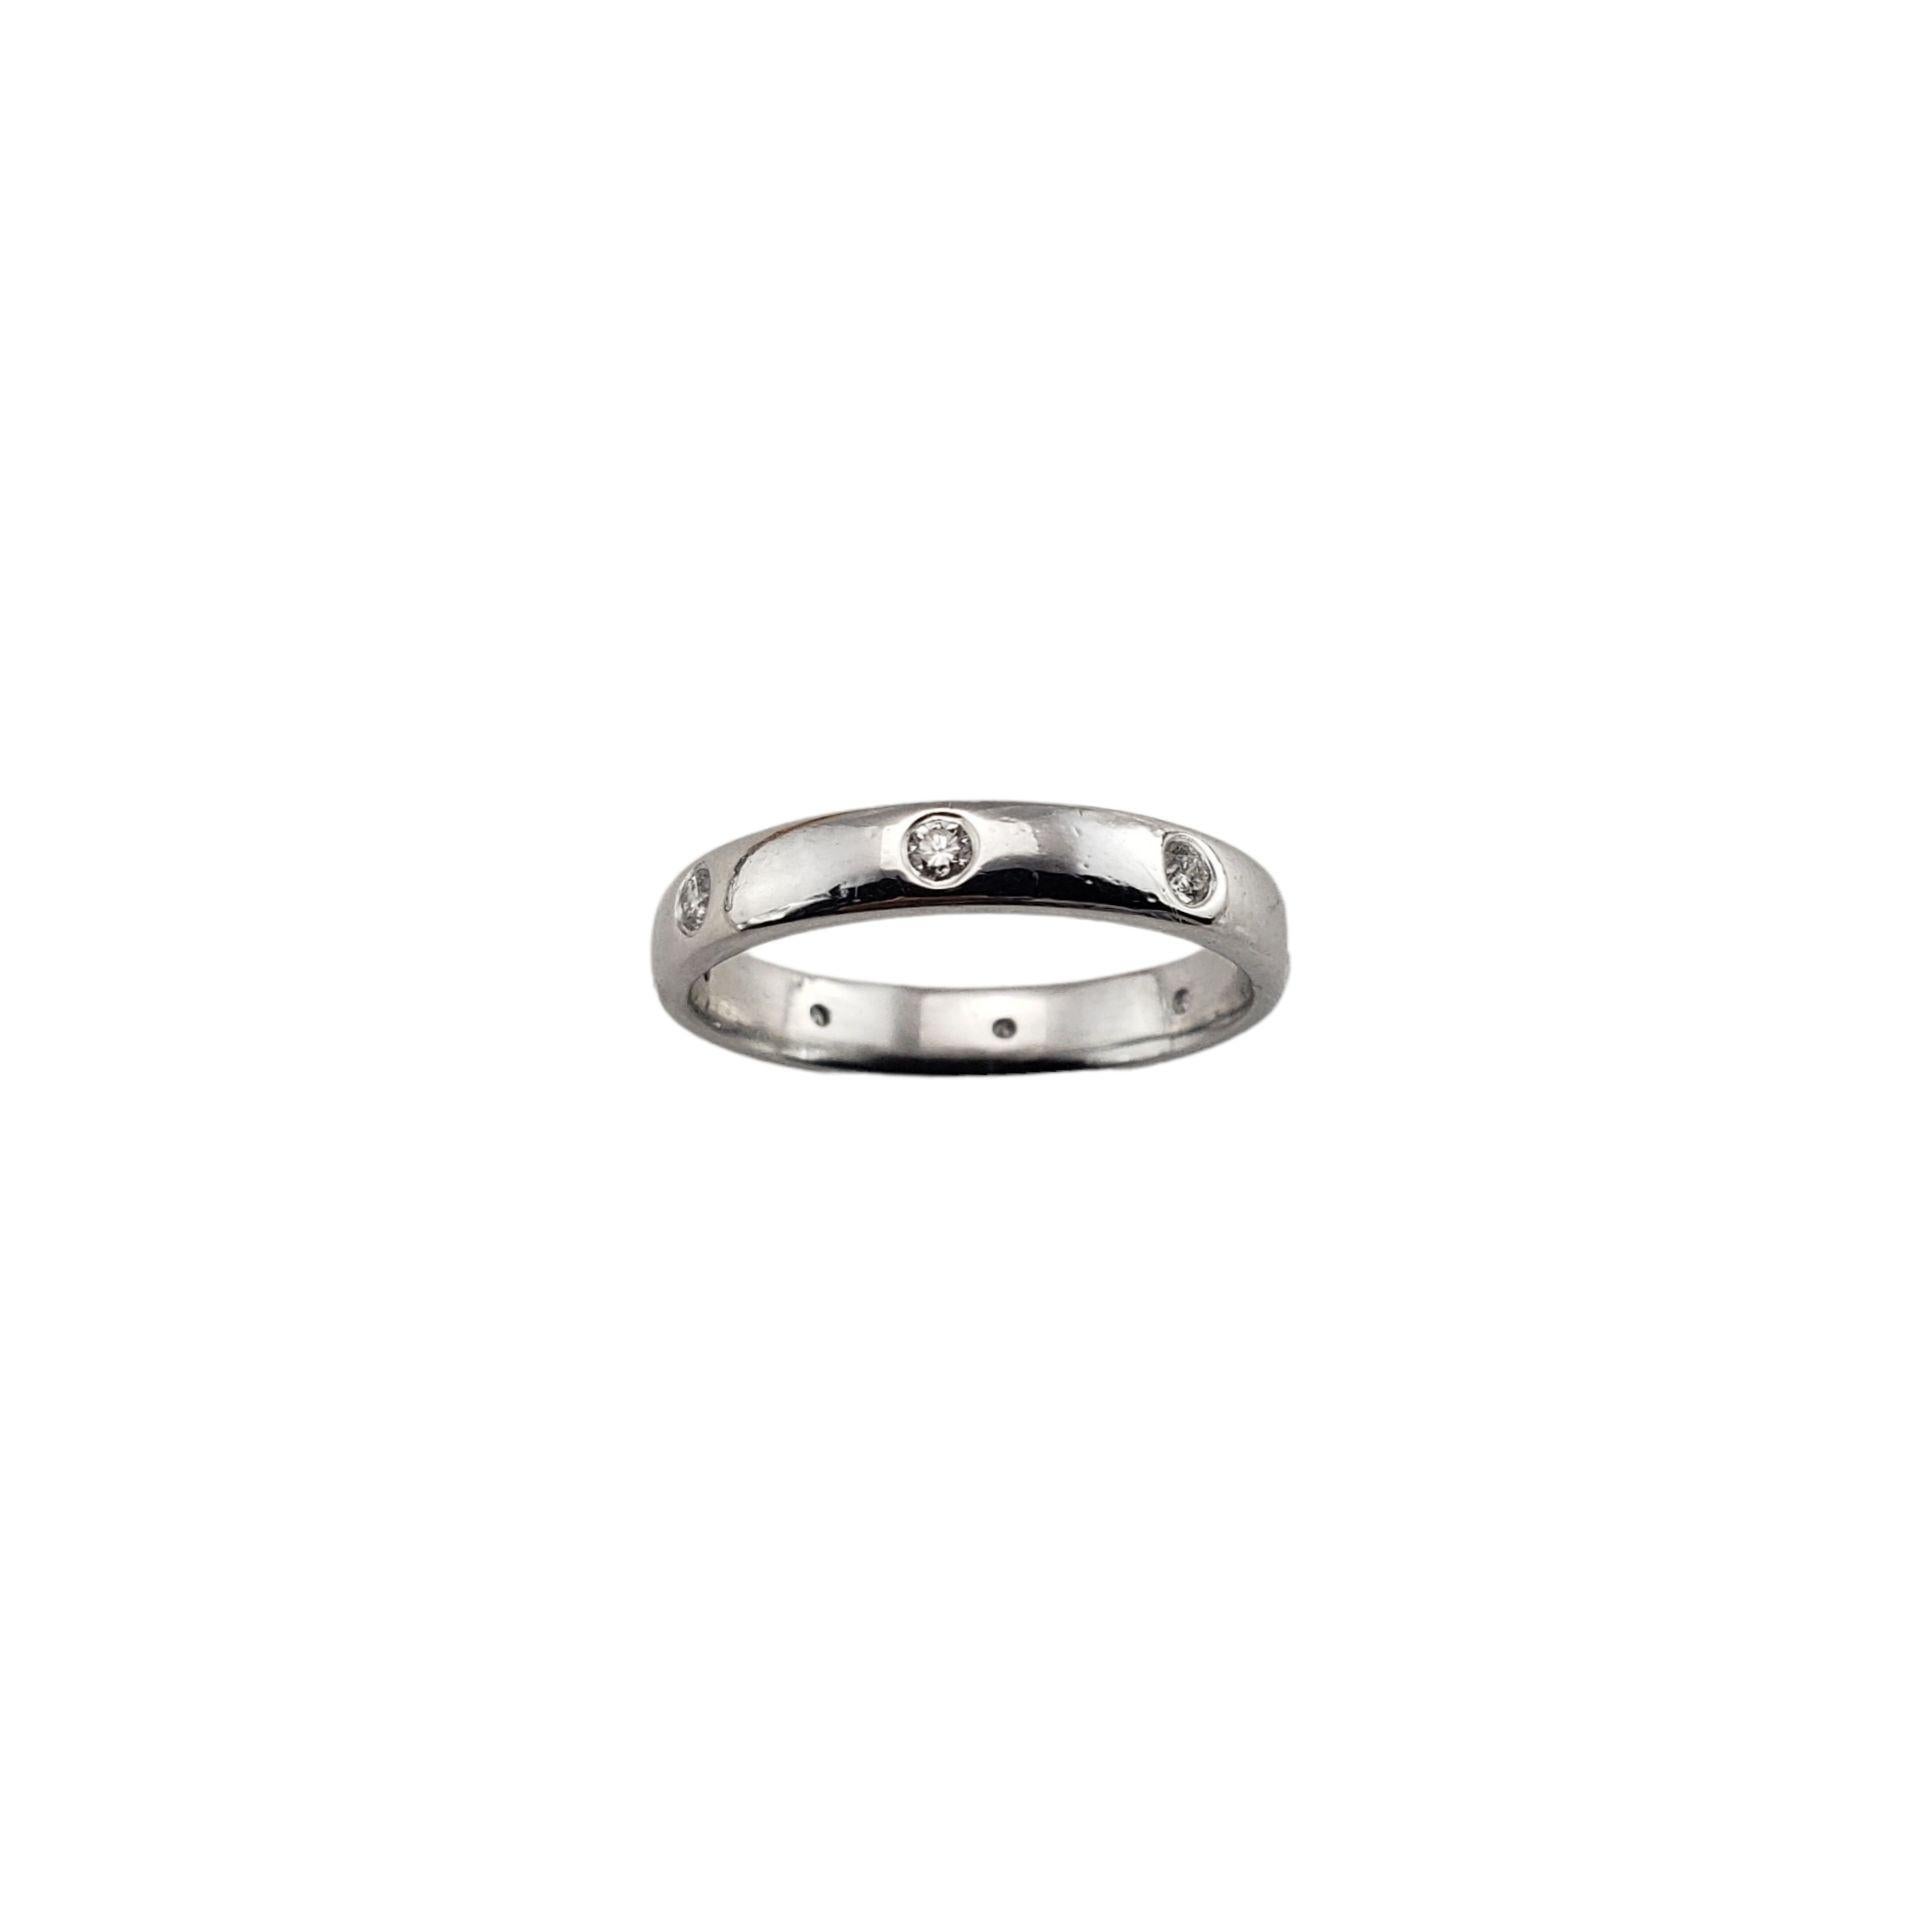 Vintage Platinum and Diamond Band Ring Size 4.5-

This elegant band features eight round brilliant cut diamonds set in classic platinum. Width: 3 mm.

Approximate total diamond weight: .24 ct.

Diamond clarity: SI1

Diamond color: G

Ring Size: